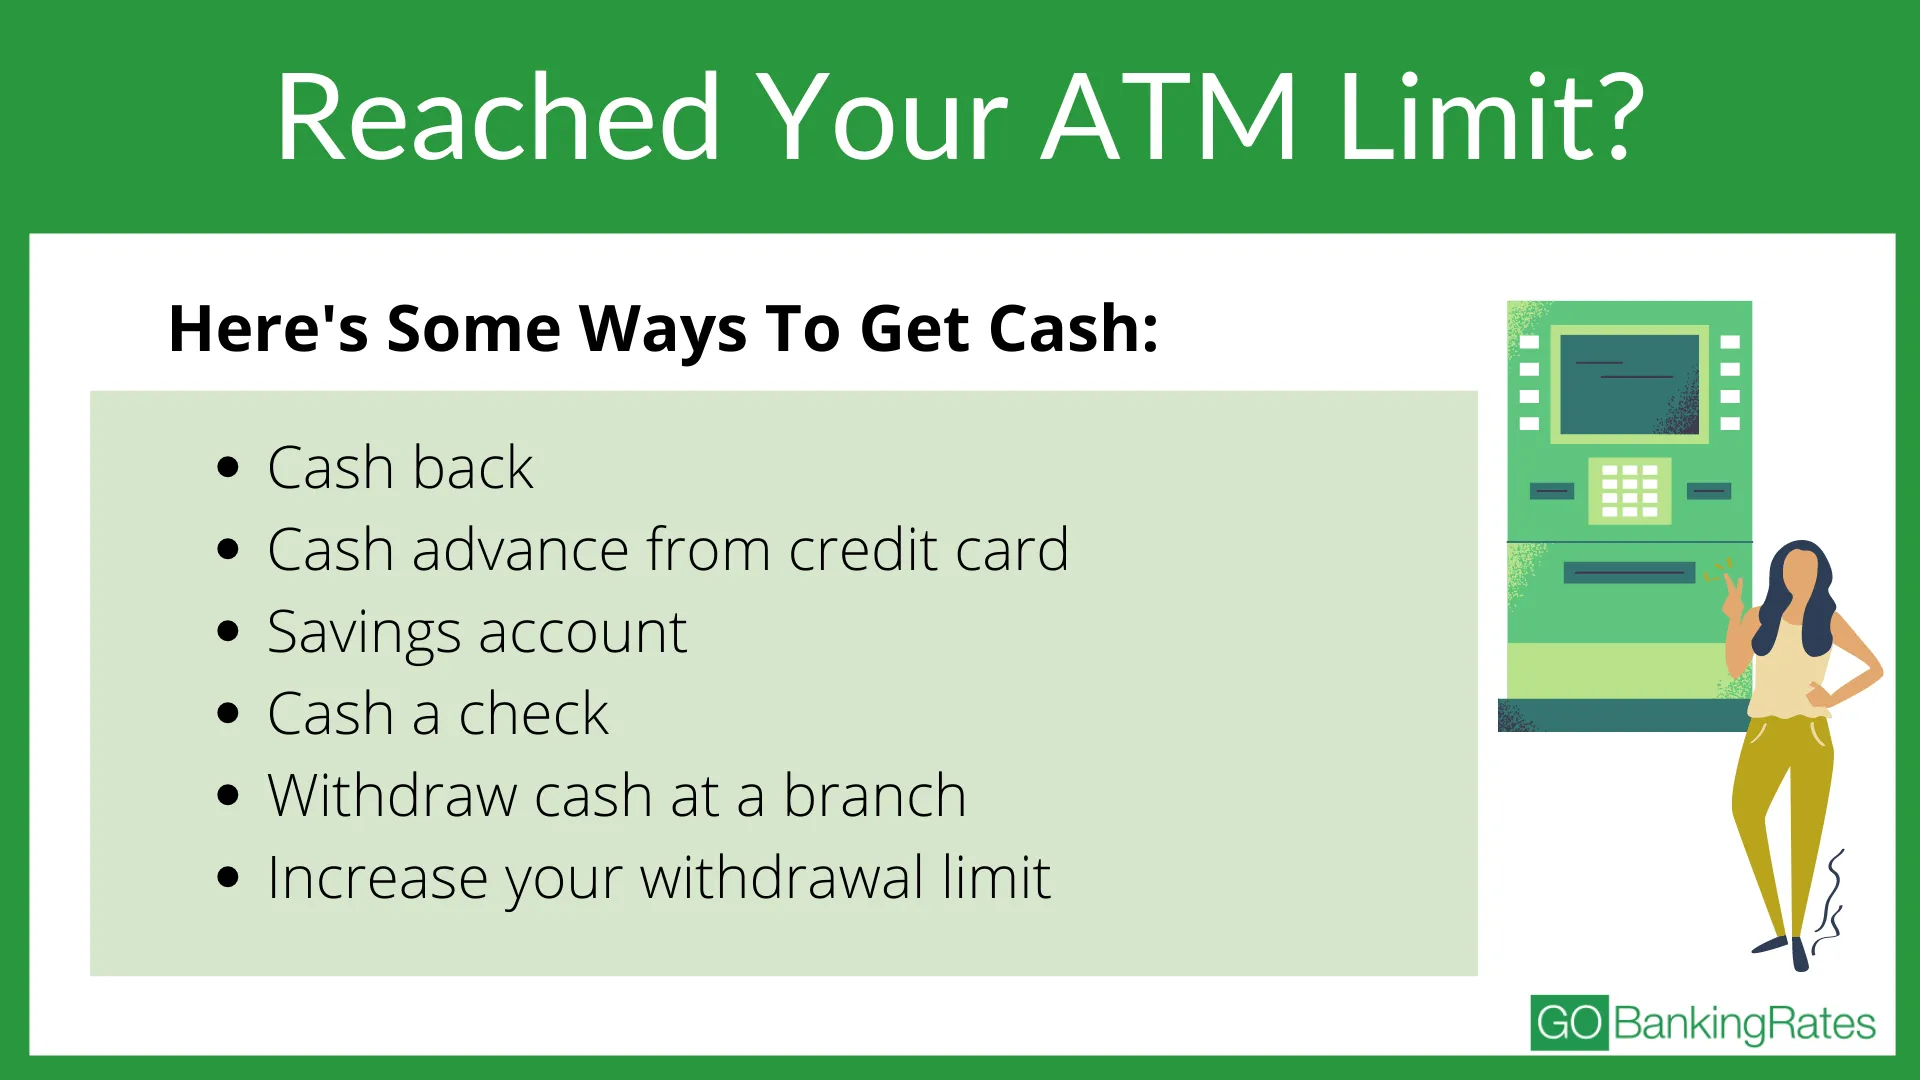 How much money can you withdraw at once?